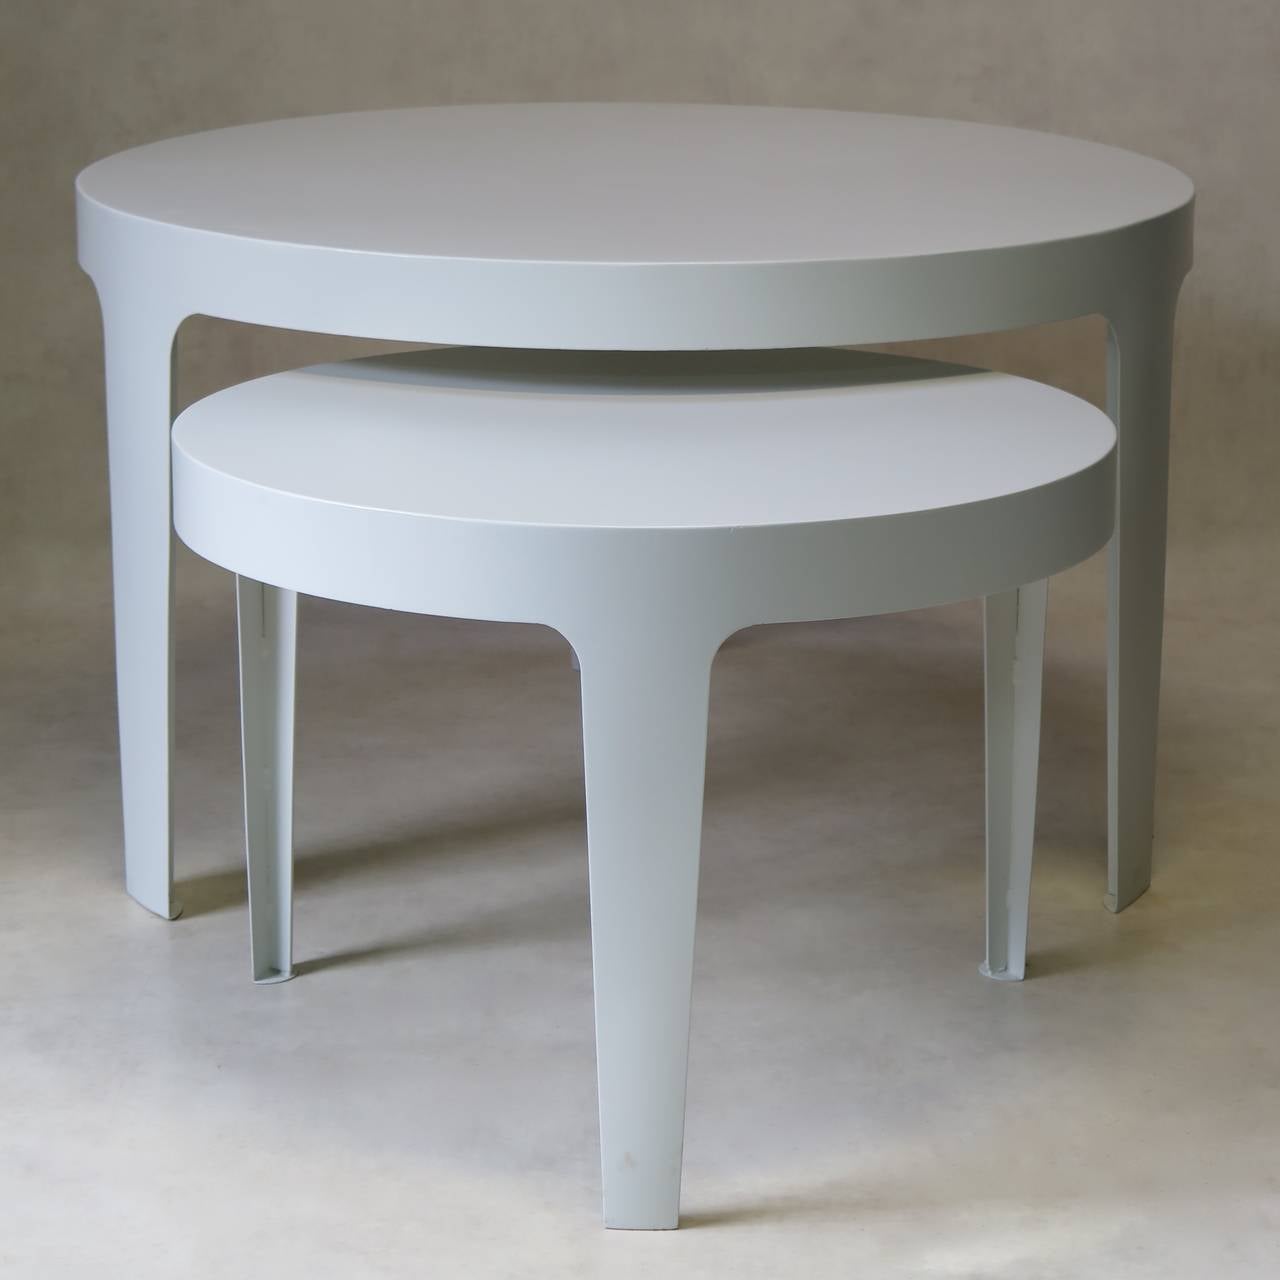 An alluring set of two chic and minimalist round metal tables, painted white. One is a dining table, the other a side/coffee table. Each table is made of one piece of iron, and has three simple, slightly tapering legs.

For indoor or outdoor